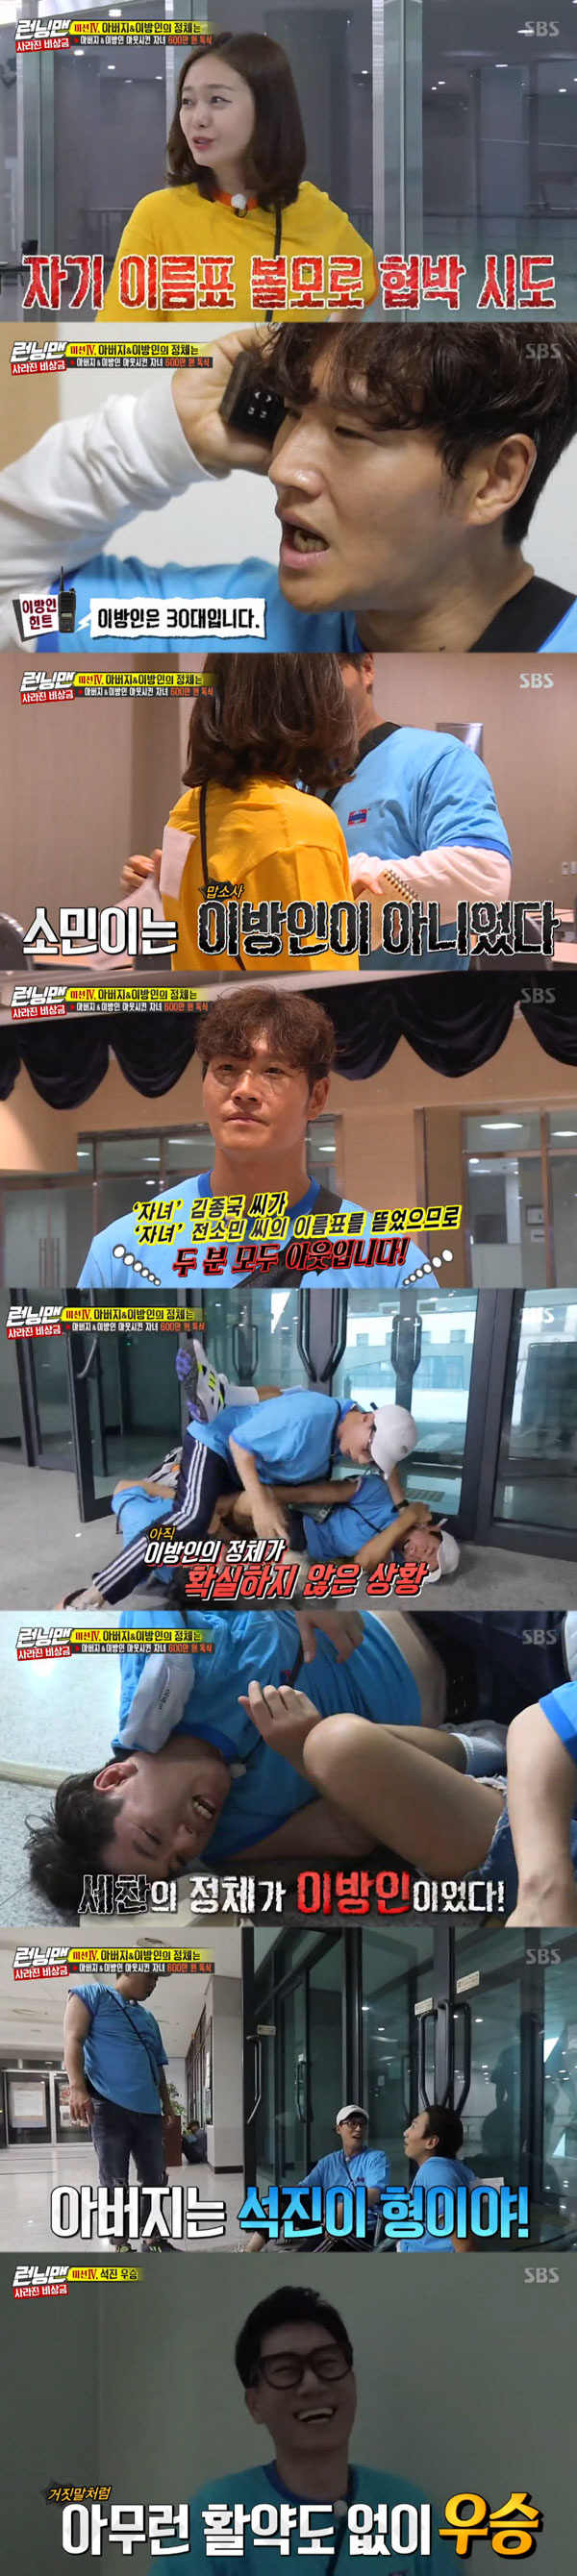 Running Man Ji Suk-jin wins finalOn SBS Running Man broadcasted on the 18th, members struggle to find the identity of their father who visited the family emergency money was held.The production team explained, Find a father who took 6 million won secretly from 6 Brother and Sister.Among the eight members, 6 Brother and Sister, and The Stranger, who is trying to steal 6 million won from his father and father, exist.All the money is now withdrawn by the father, so it is not possible to use any personal expenses. The expenses required for the mission can be borrowed to the production crew, and the loan will be repaid by winning the prize money at the end of the race.Members who fail to win the prize money will be reimbursed with penalties such as One Gonjang, Cream Bomb, Water Bomb, Indoor Skydiving, and Bunge without Line.The first mission is Lonely Meal, Pyeongyang Cold Noodle, Kimchi Steam, Hasan Waters Steak Choices one of the three restaurants, and the smallest number of members is free.First, Yoo Jae-Suk and Ji Suk-jin, Haha, Lee Kwang-soo and Yang Se-chan choices Pyeongyang cold noodles.Lee Kwang-soo decided to stay in Pyeongyang cold noodle alone through the game, but Yoo Jae-Suk, Haha and Ji Suk-jin again Choices Pyeongyang cold noodle.Eventually, the four people borrowed 300,000 won each.Kim Jong-kook, Yang Se-chan and Jeon So-min borrowed 100,000 won each, the basic meal, and Song Ji-hyo, who choiced kimchi steamed alone, got a hint about his father with a free meal.In the Tell me the best and Quees King Shooting Goal mission, Jeon So-min won the championship and got a hint about his father.The final mission was held amid suspicions of Jeon So-min as a potential candidate for The Stranger.There are hidden radios throughout the building where you can see clues from your father and The Stranger.It is possible to acquire one of the father and the Stranger hint through the radio by Choices.First Haha got a radio and got a hint about his father.Jeon So-min was also the first to be In-N-Out Burger by The Stranger, with Haha getting hints about his father.His child Song Ji-hyo also became an In-N-Out Burger.Kim Jong-kook, who won the radio at this time, got a hint about The Stranger, and opened the name tag of Jeon So-min at the word The Stranger is in his 30s.However, Jeon So-min was a child, not The Stranger; the identity of the subsequently revealed The Stranger was Yang Se-chan and the father Ji Suk-jin.Father Ji Suk-jin grasped his identity and won the final.The production team explained, The 6 million won was an independent fund that Mr. Lee Hoi-young used to establish an emerging school.Ji Suk-jins final prize money of 6 million won will be Donated by the Korean Association of Independence Merits in the name of Ji Suk-jin.